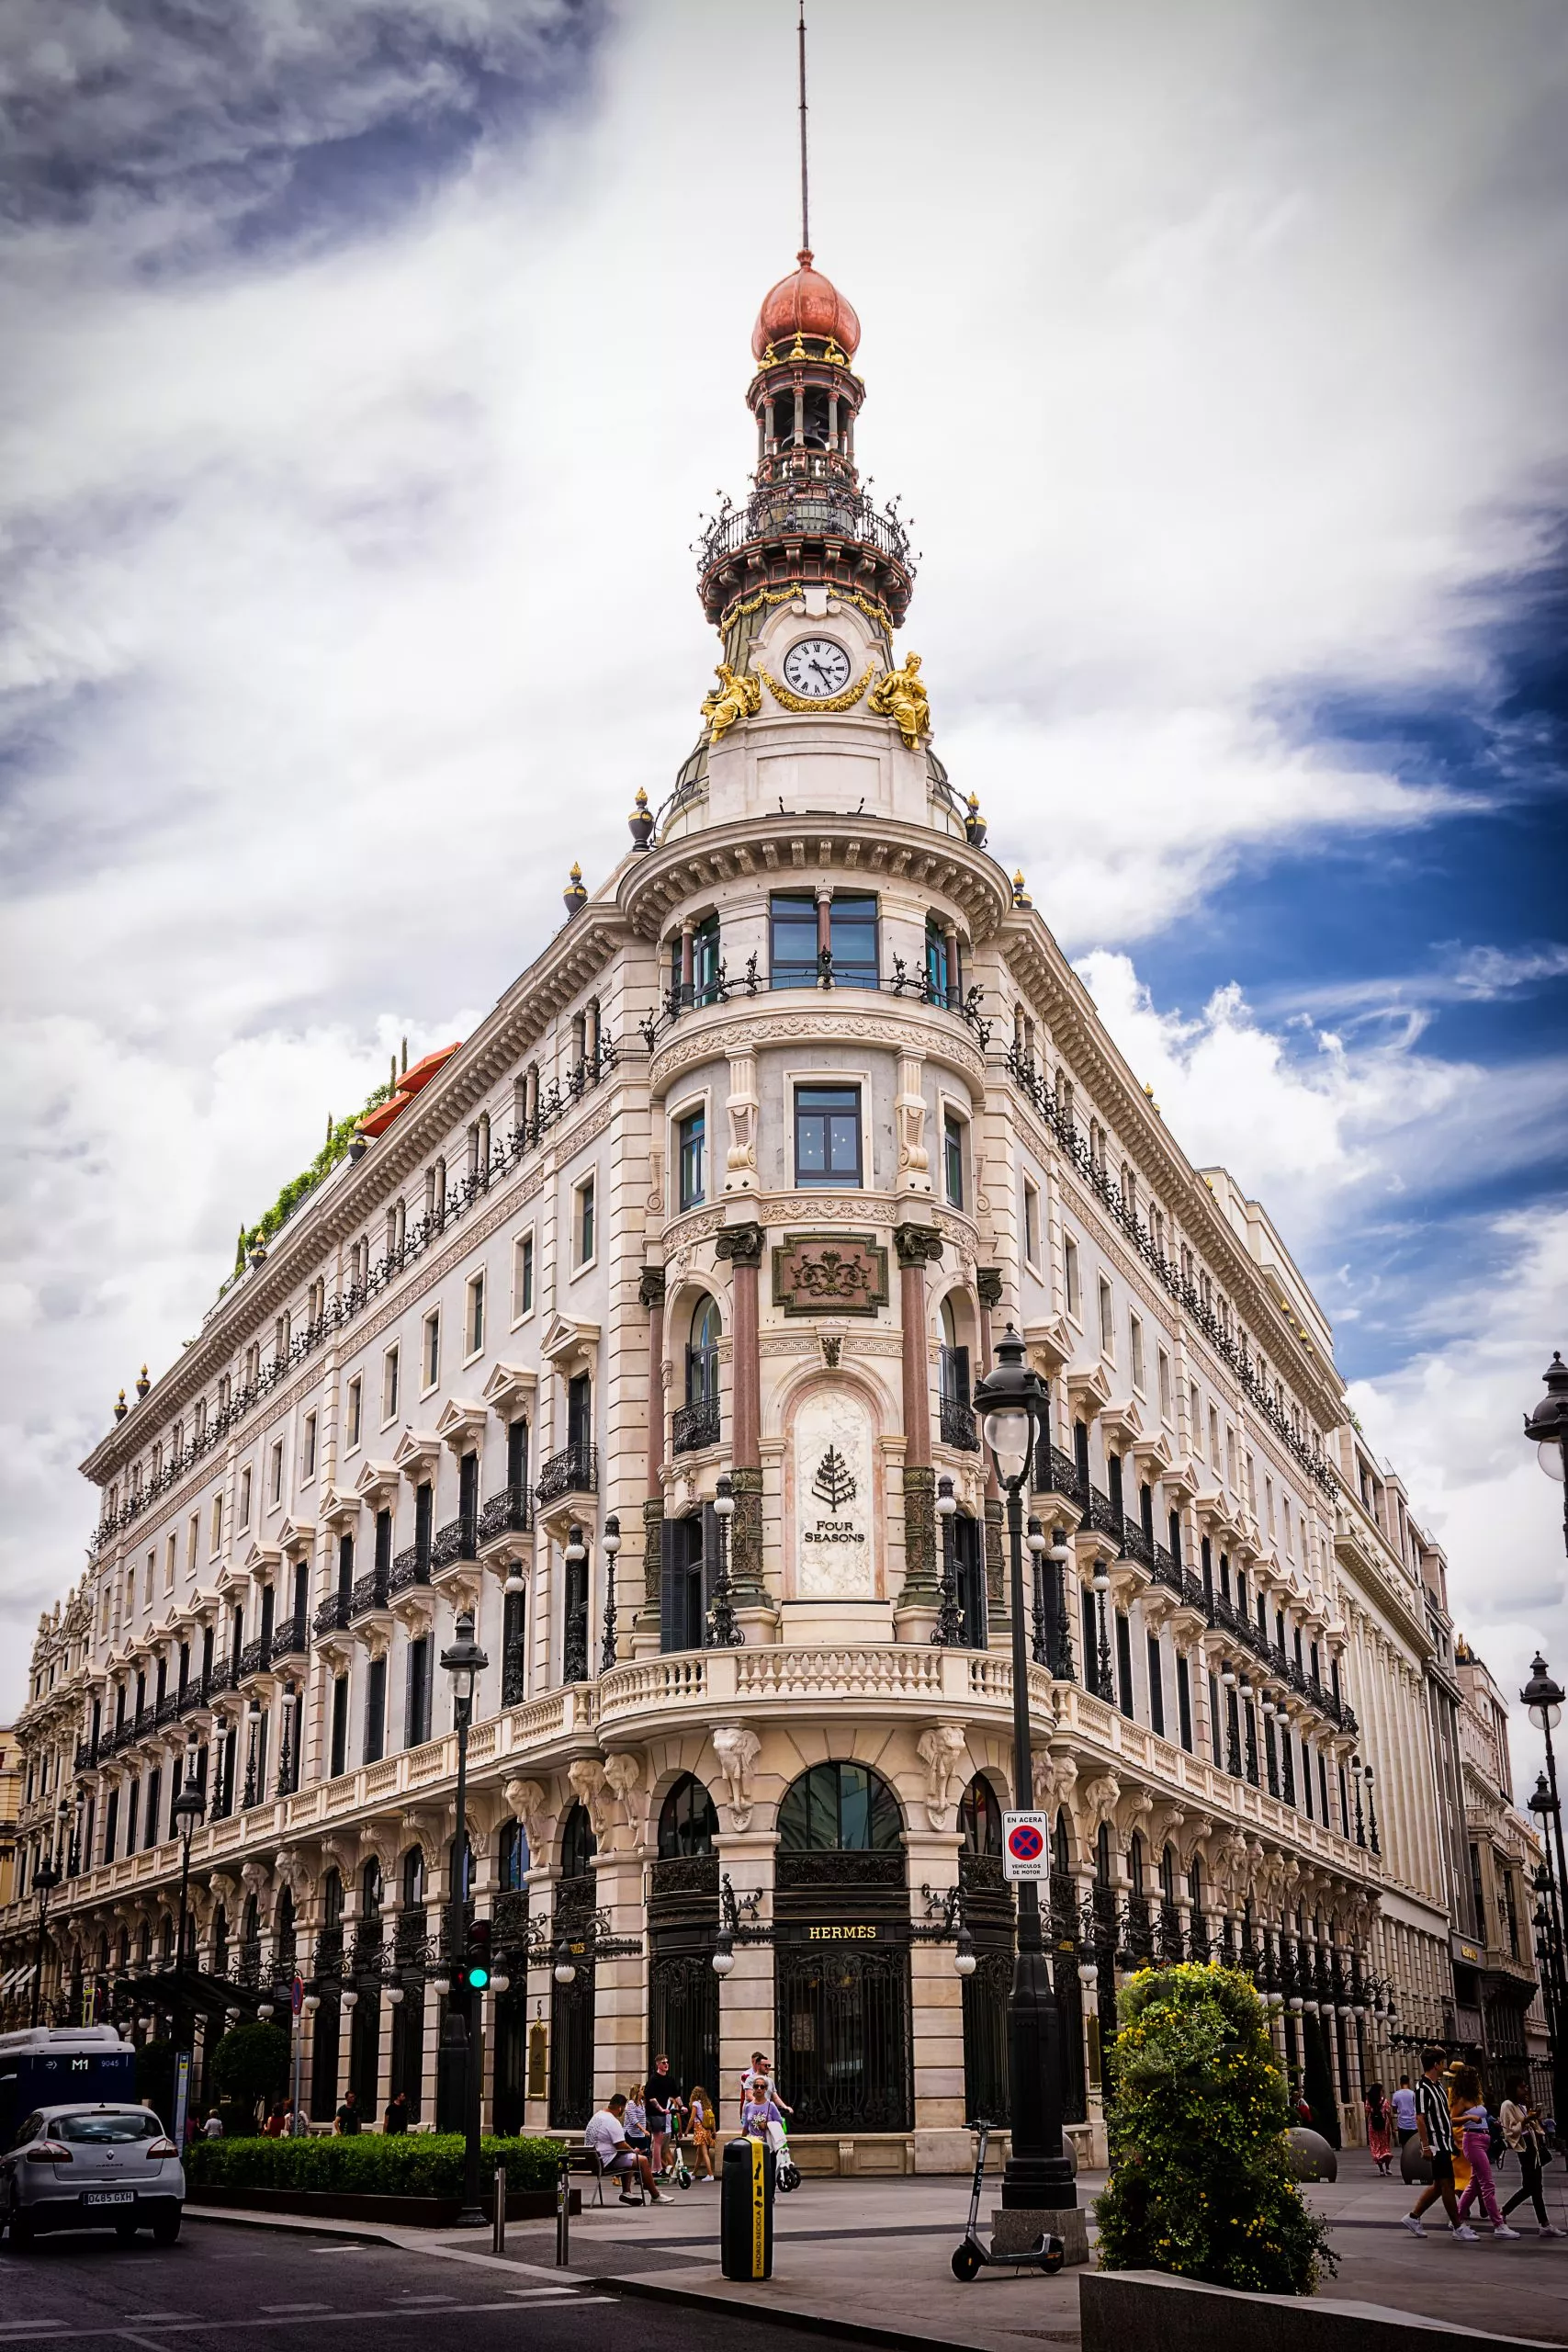 Madrid, Spain - June 20, 2022: Four Seasons Hotel building with Hermes shop on the first floor